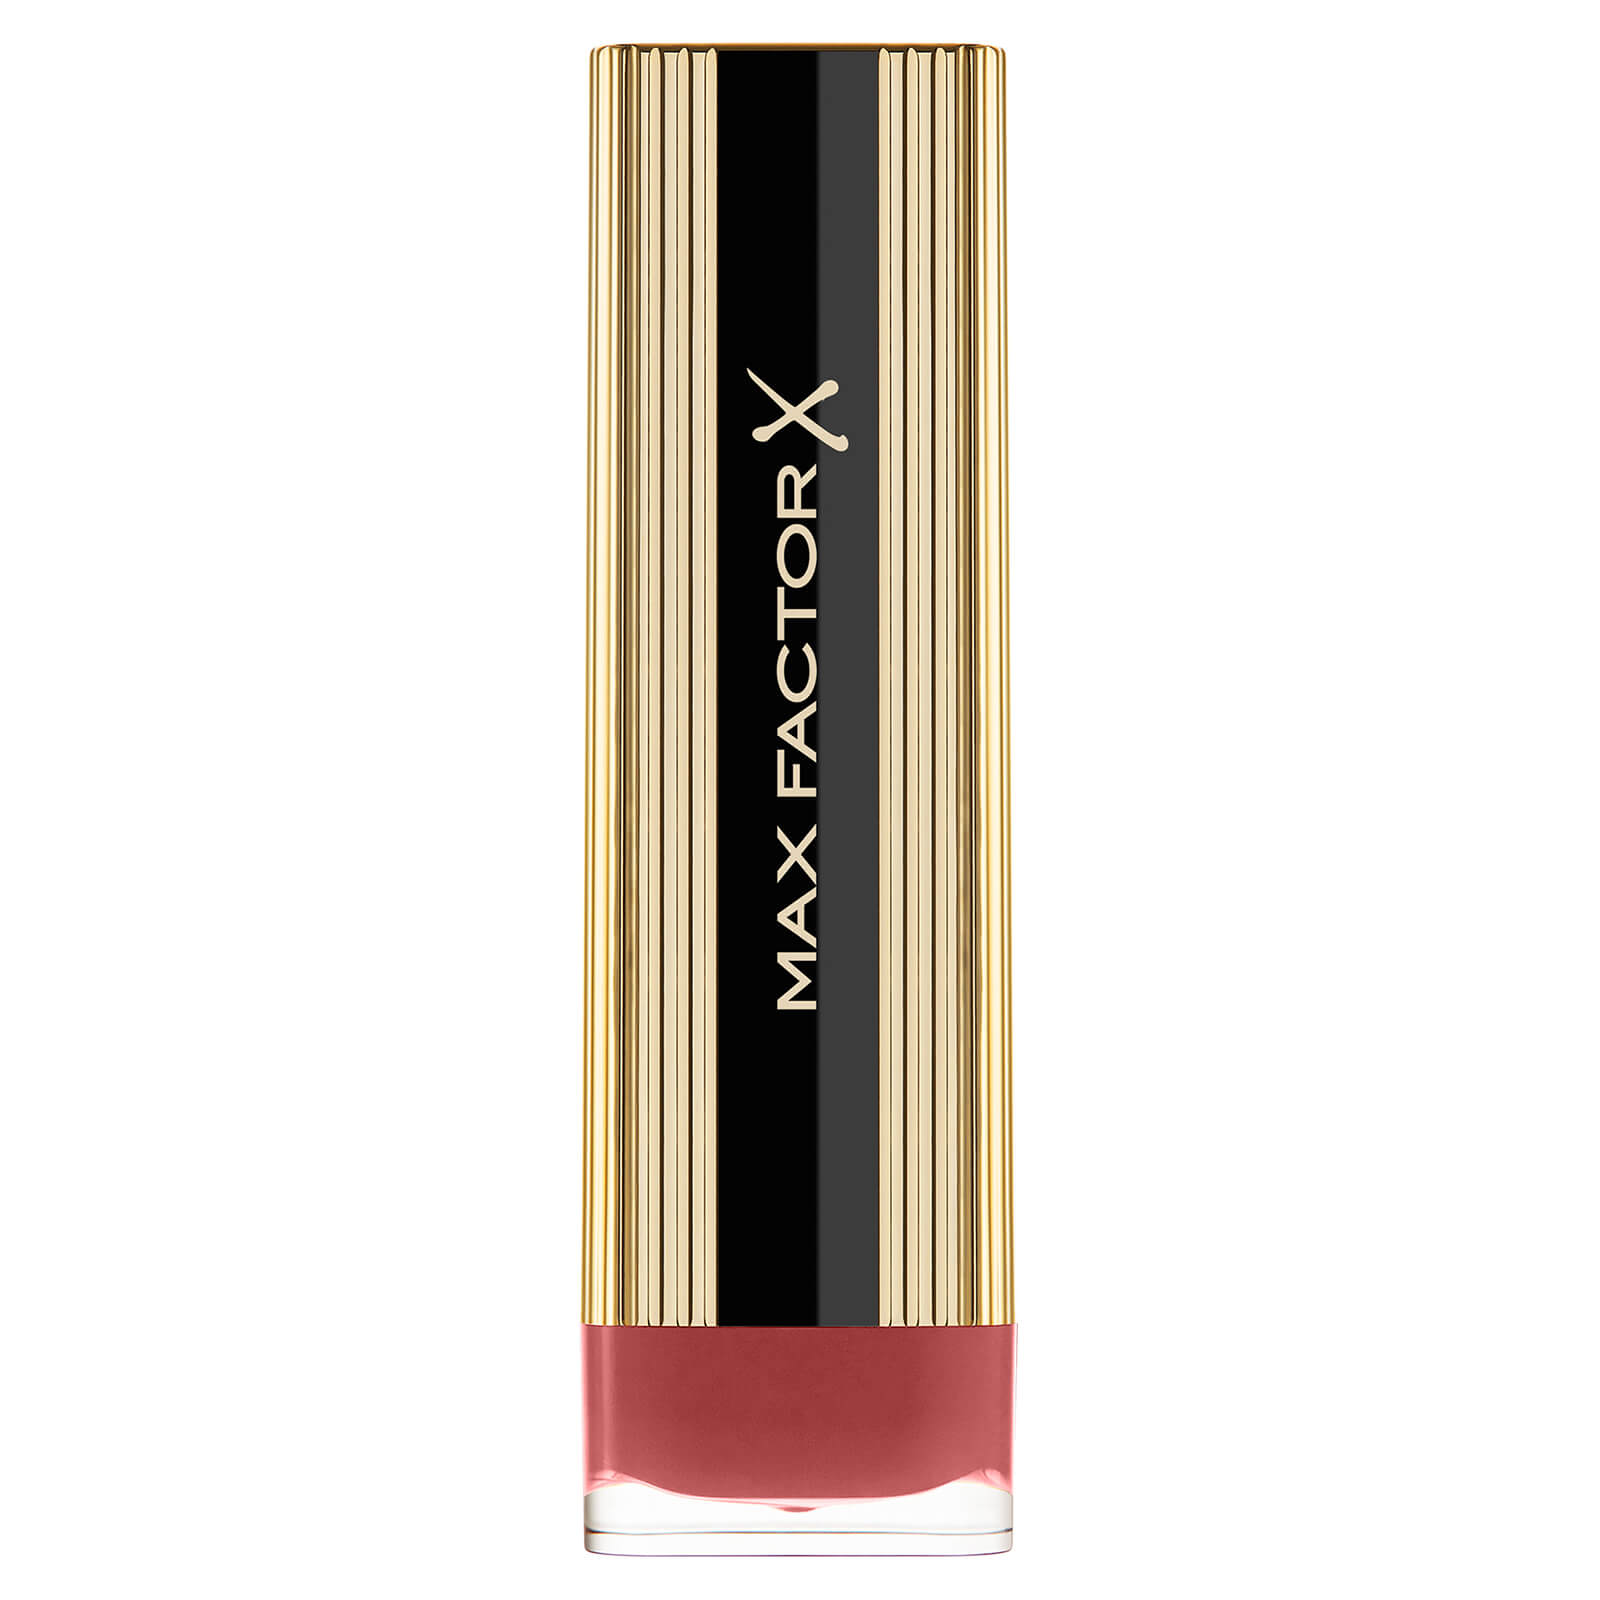 Image of Max Factor Colour Elixir Lipstick with Vitamin E 4g (Various Shades) - 015 Nude Rose